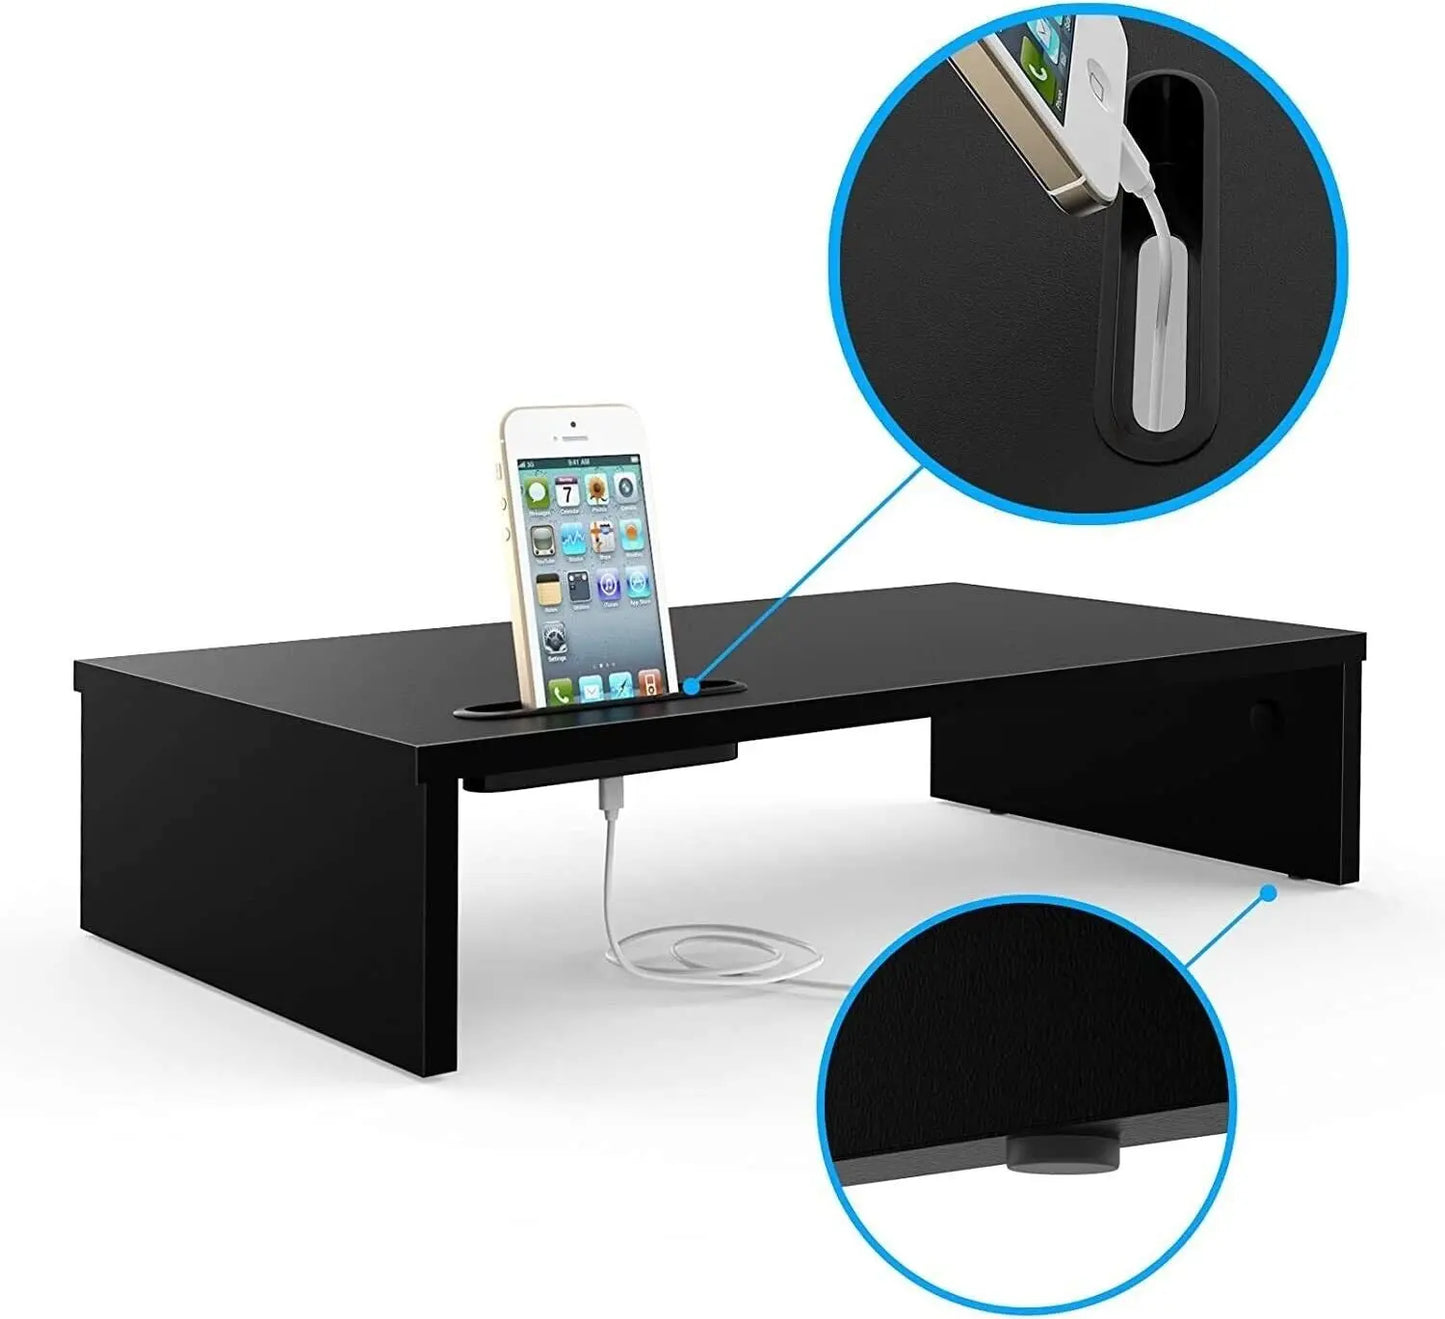 Black Monitor Stand Riser - Perfect Desk Organizer for Your Computer, TV, or Laptop